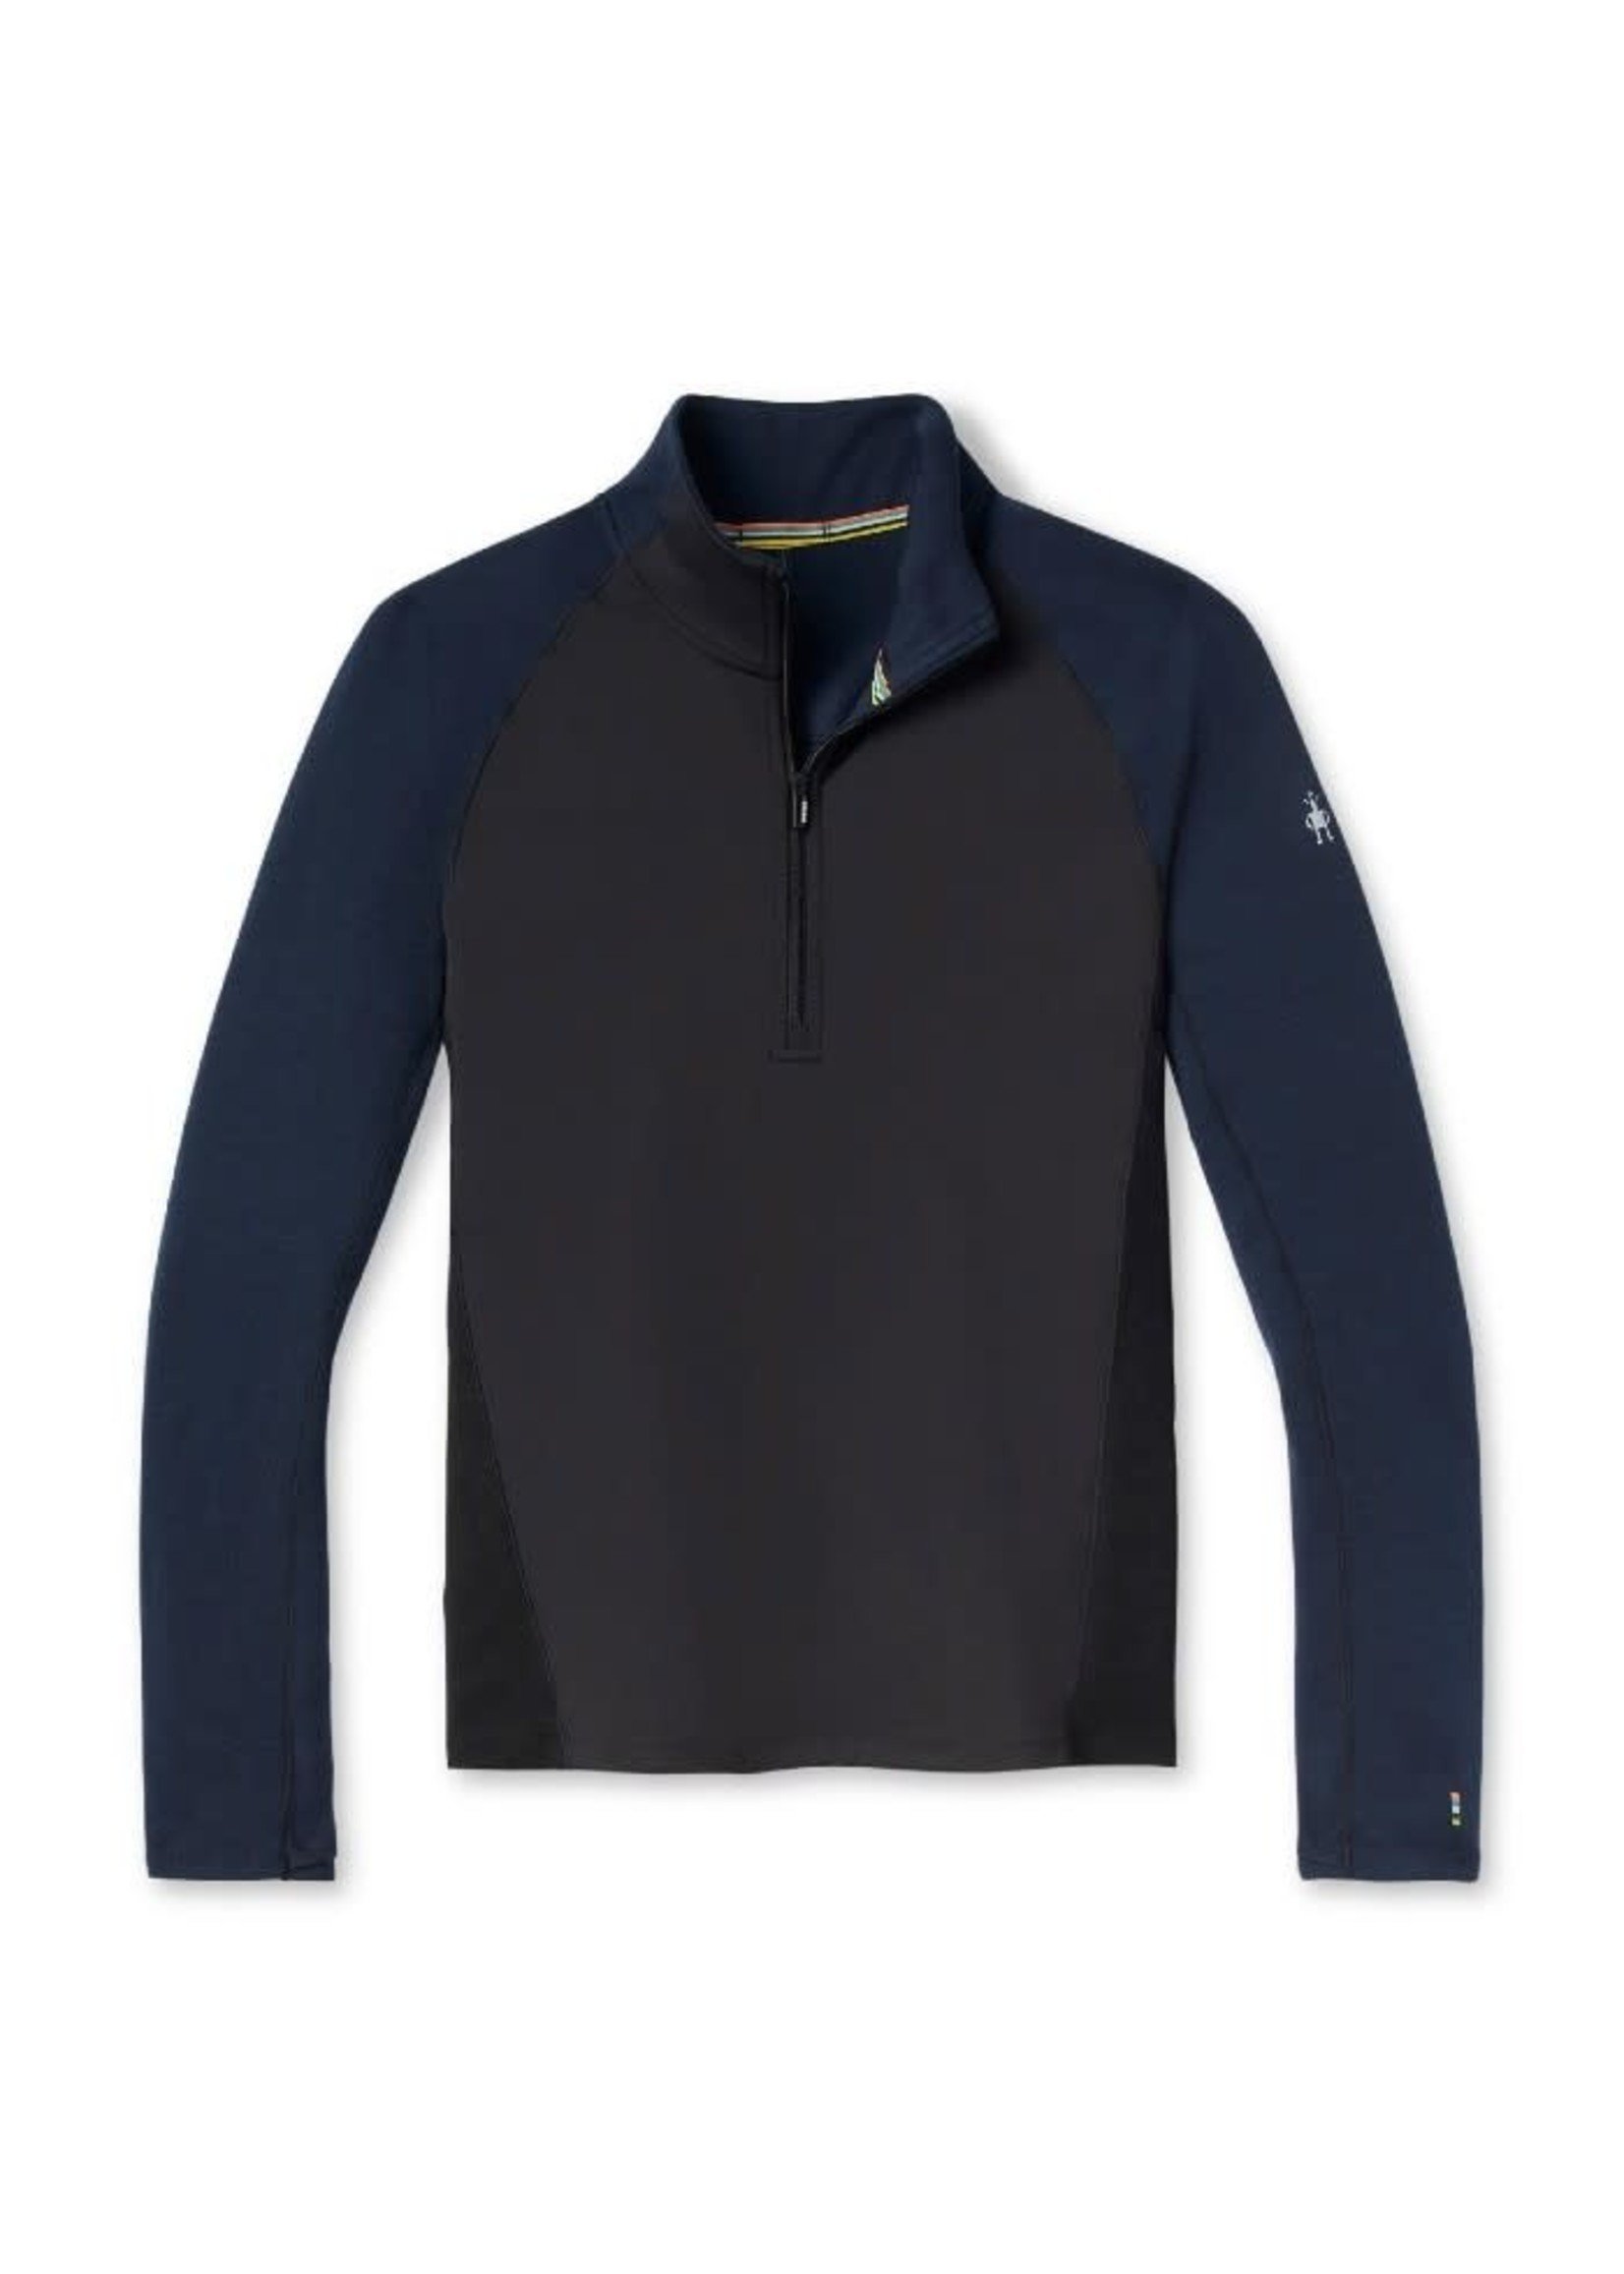 SMARTWOOL Mens' baselayer with wind proof